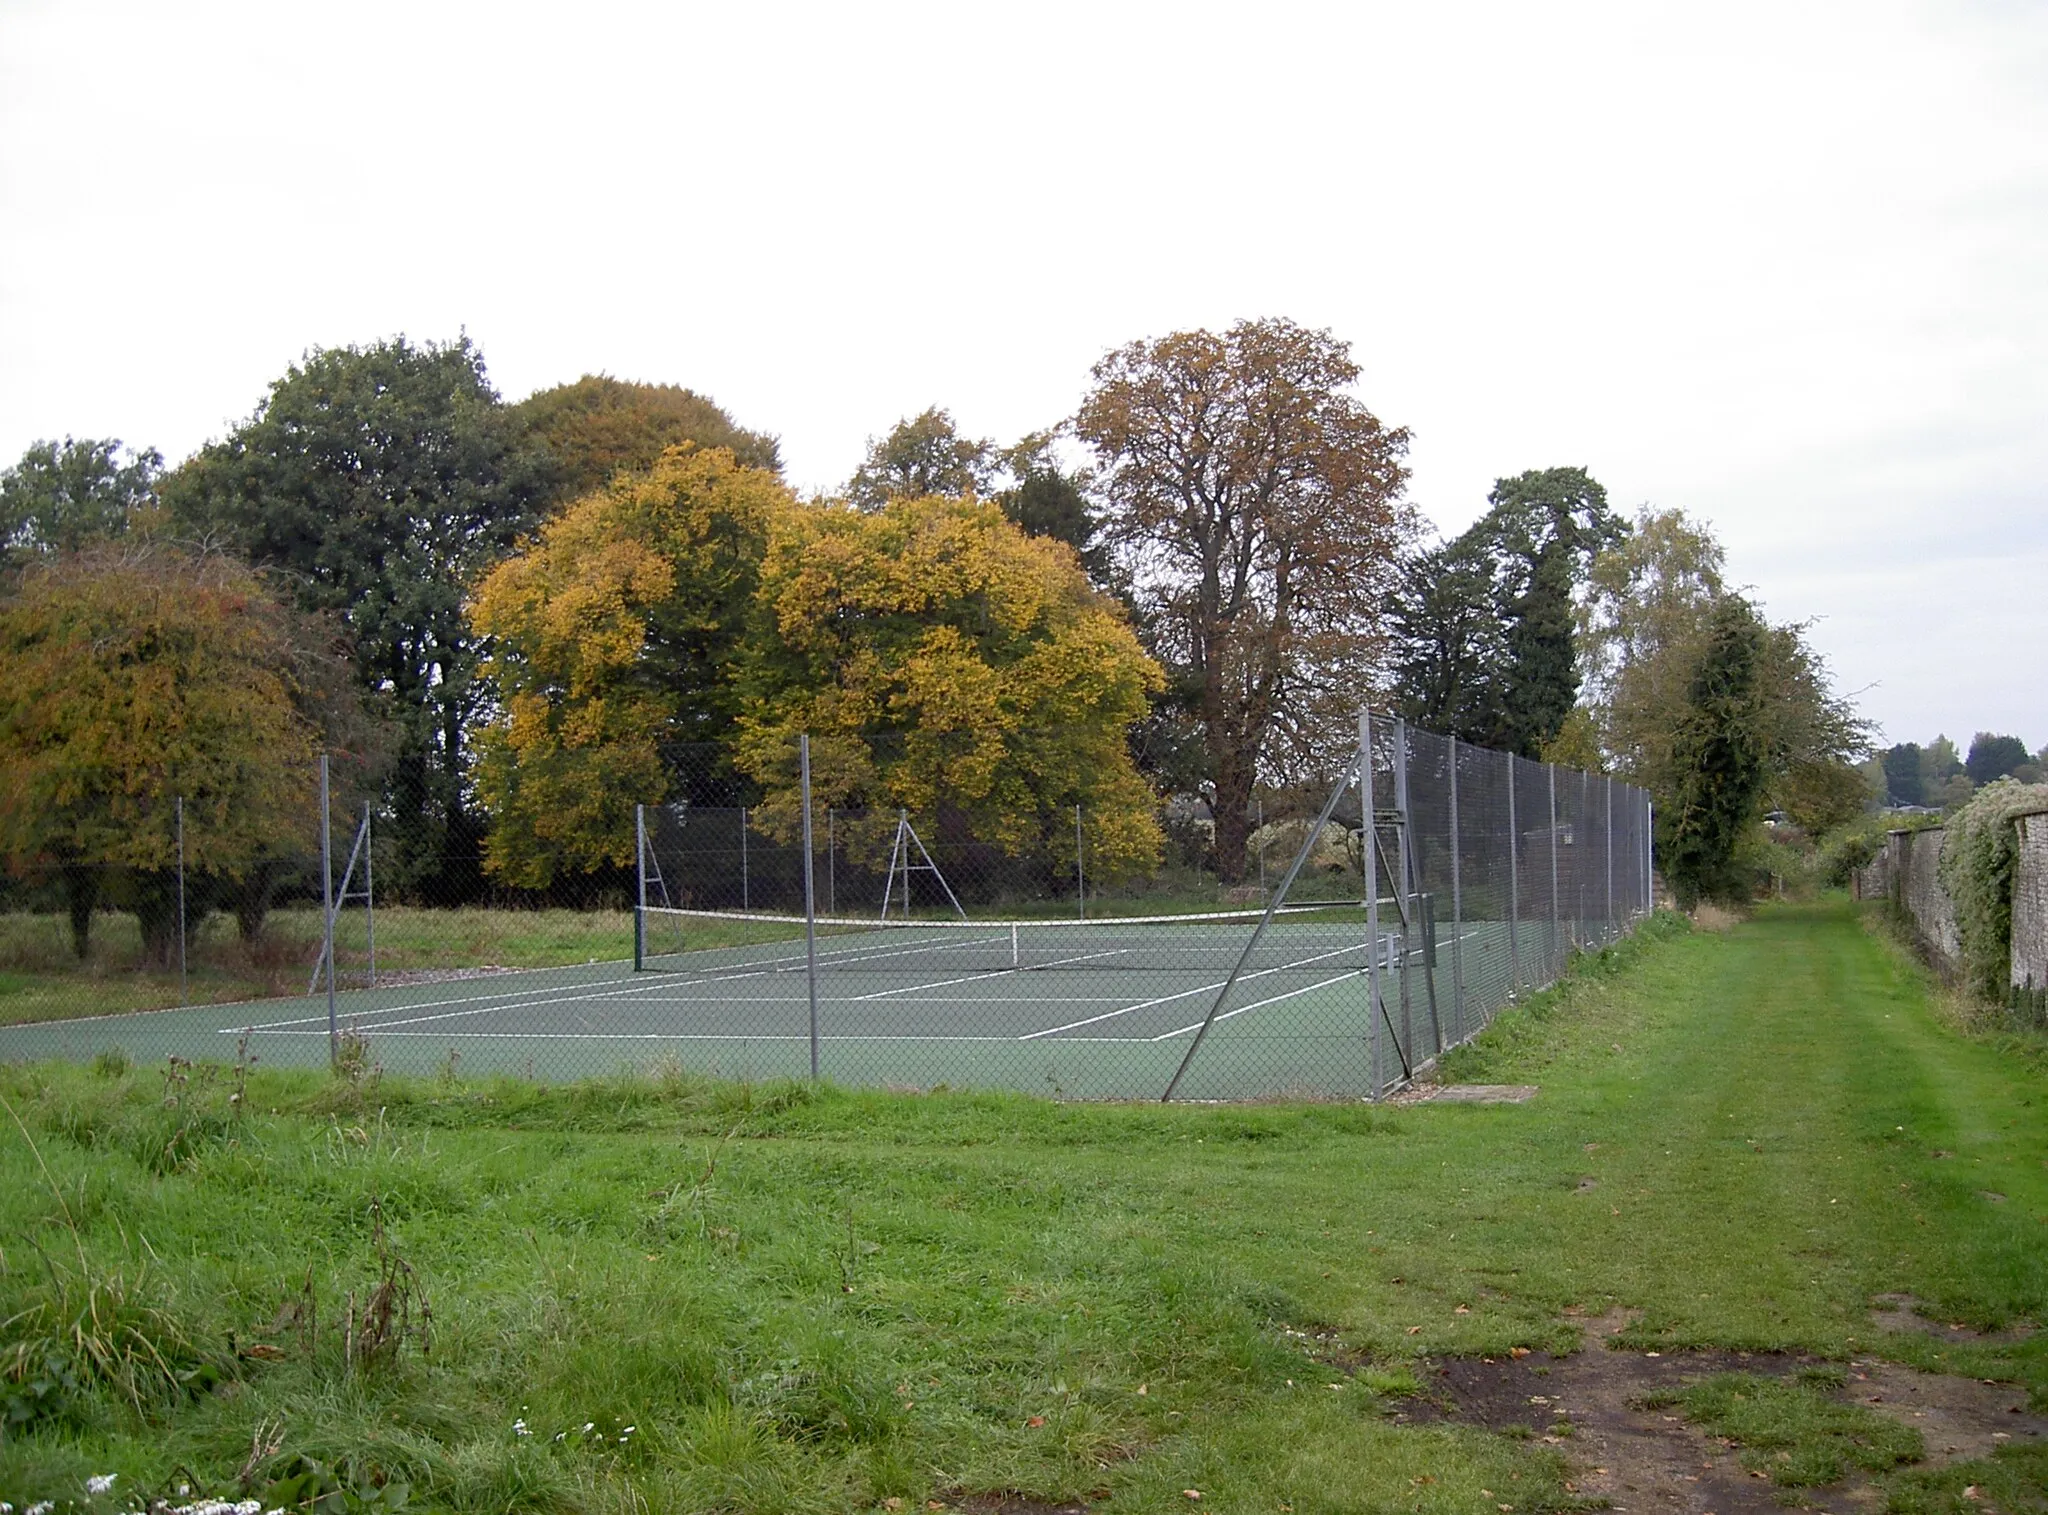 Photo showing: A tennis court in the country